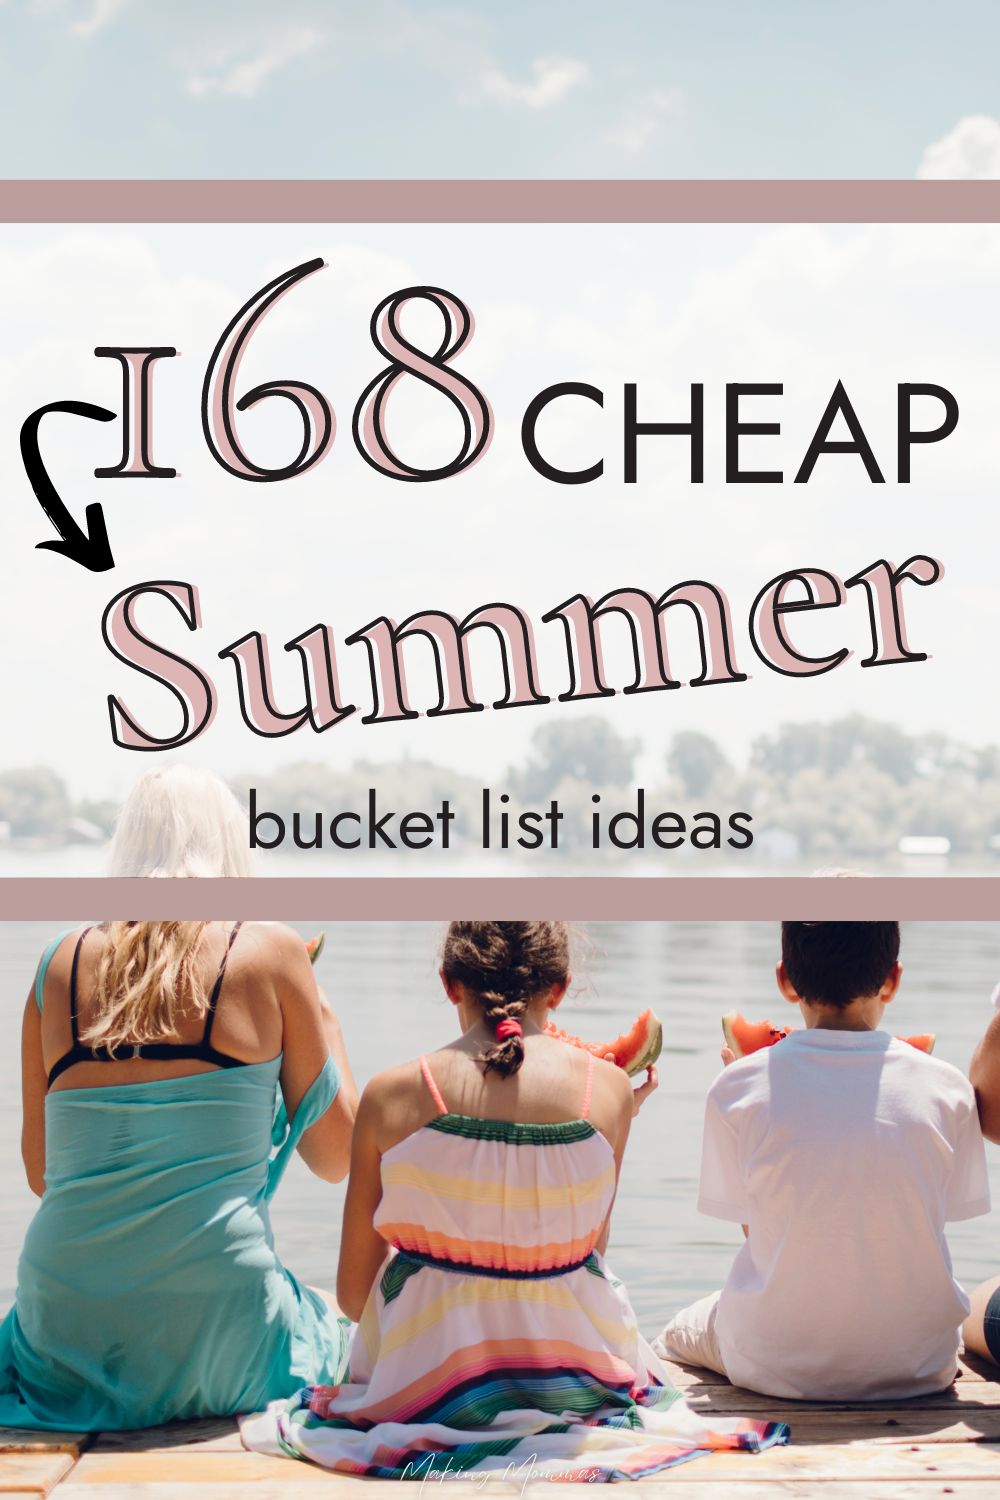 Pin image that reads, "168 cheap summer bucket list ideas", with an image of a family sitting on a dock eating watermelon.